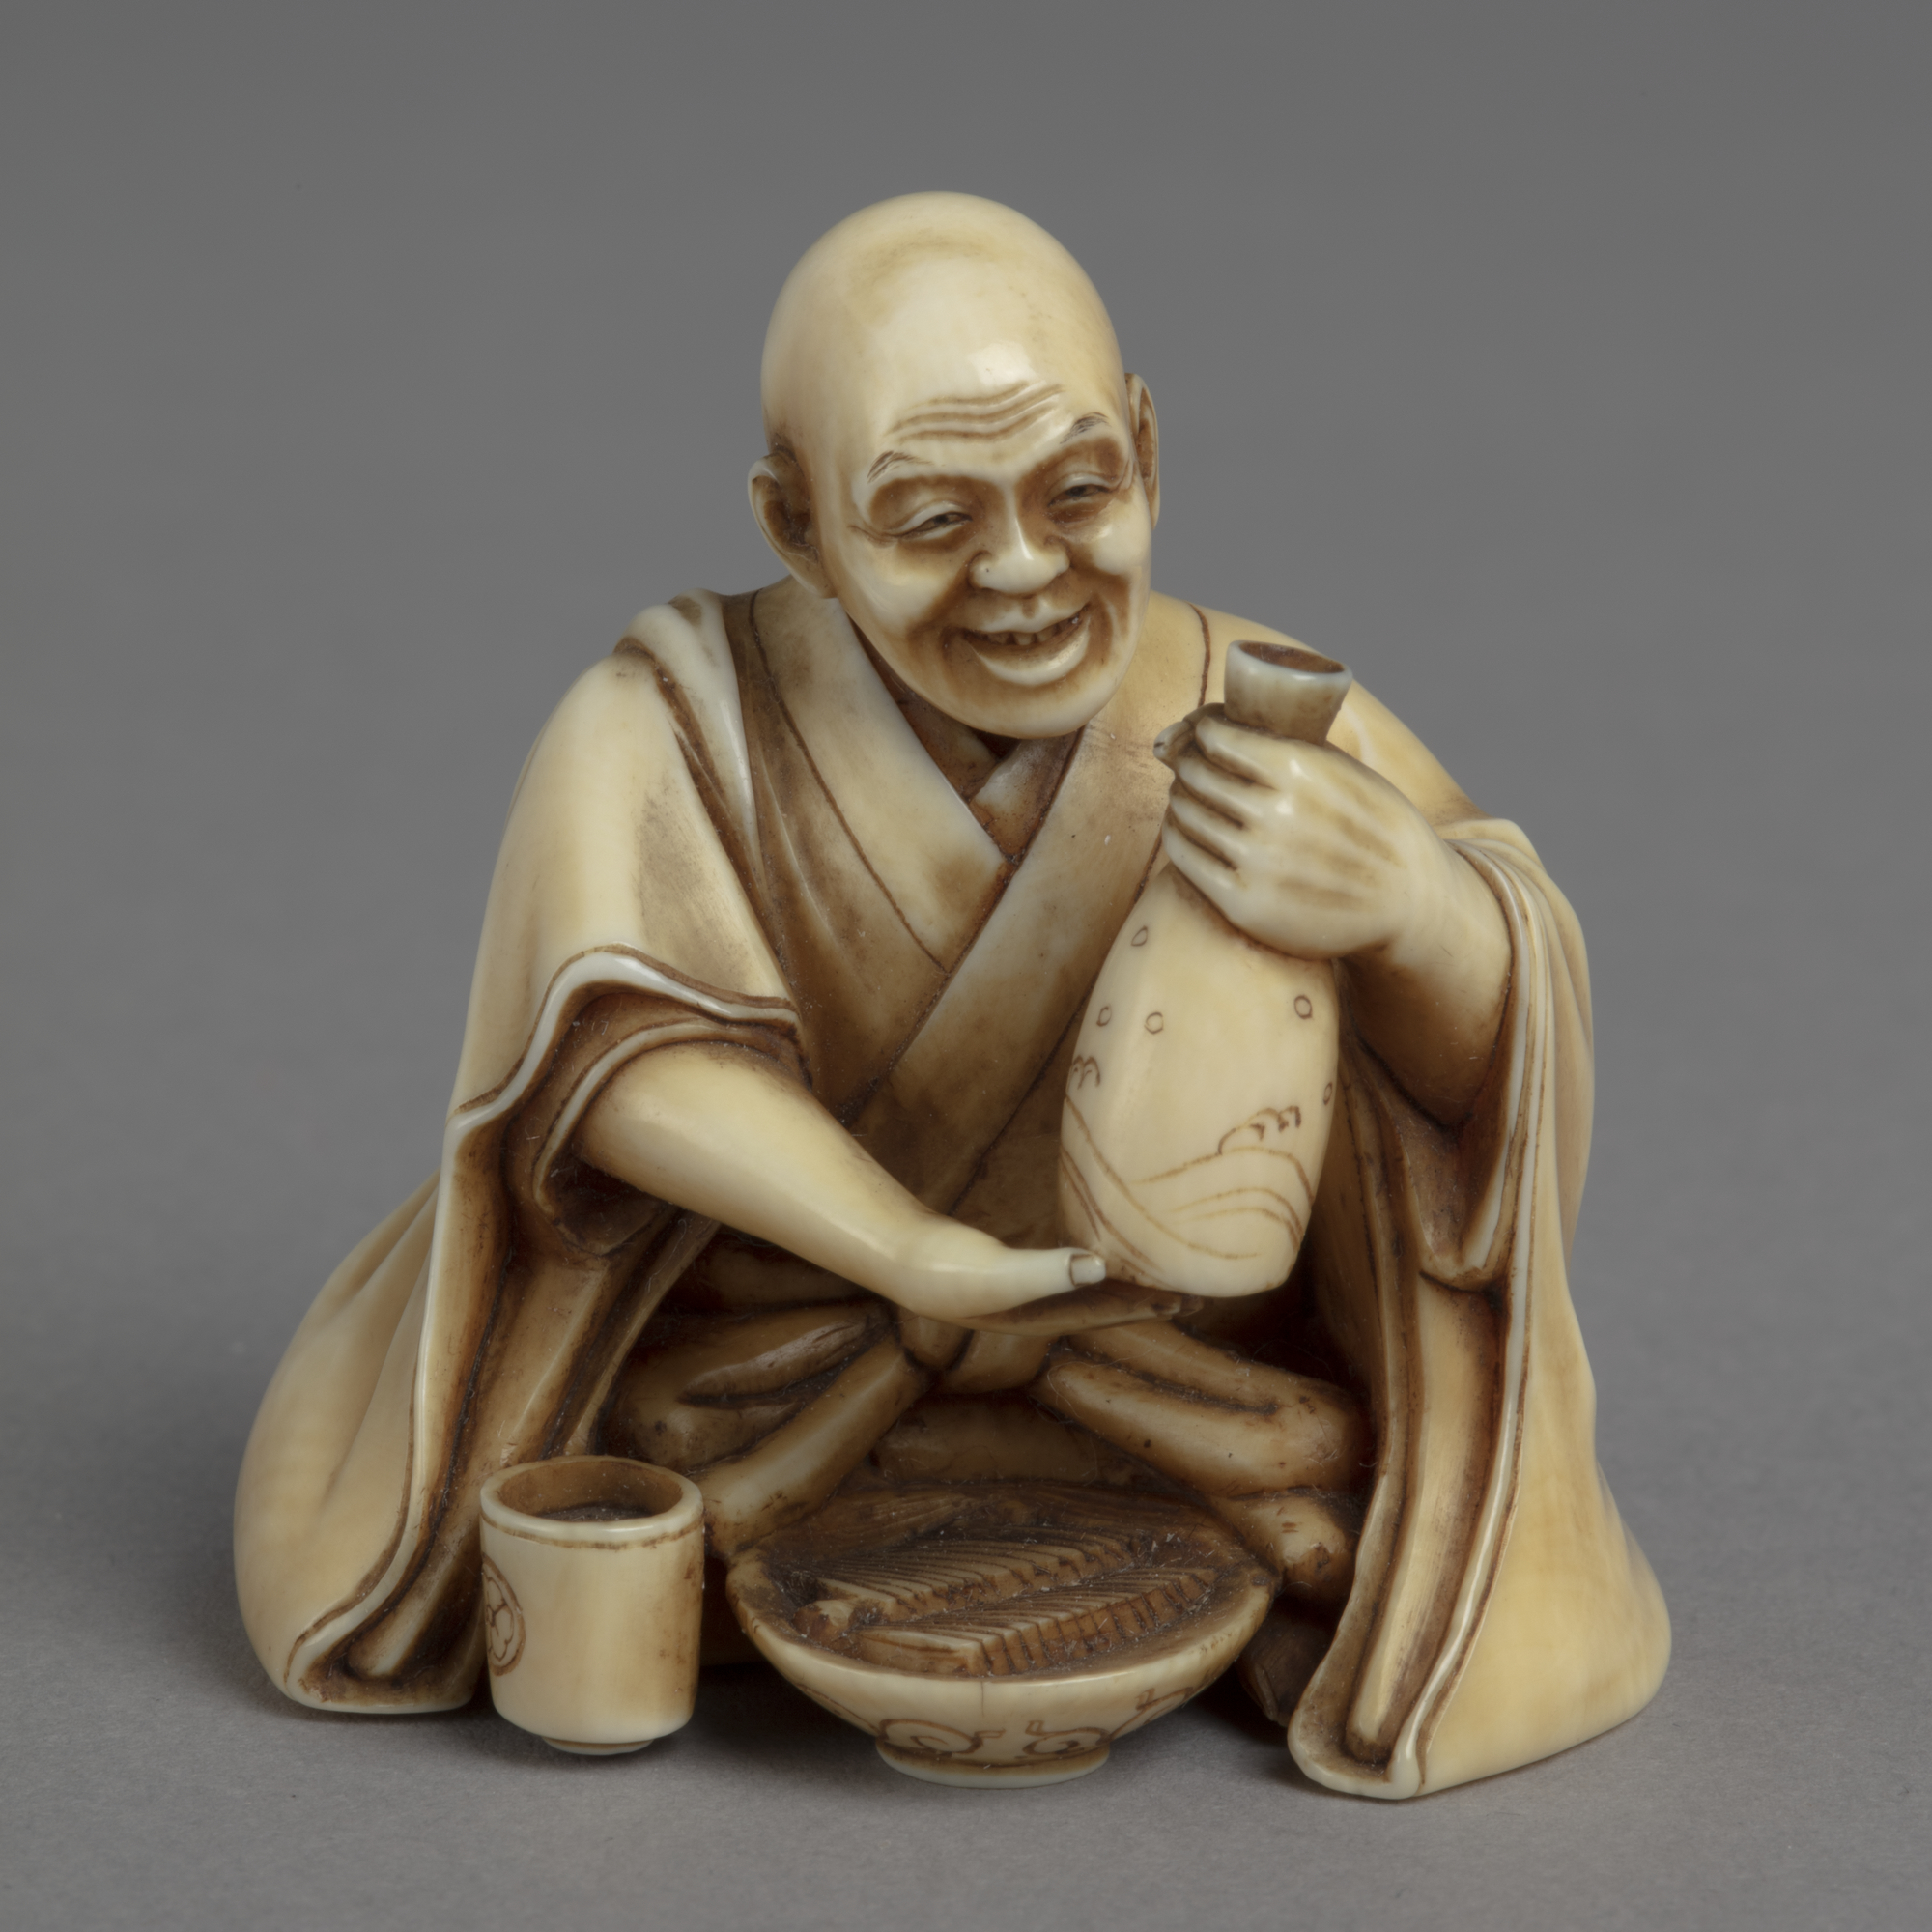 A Japanese okimono ornament of a seated man holding aloft a sake flask, a bowl of noodles and cup before him.